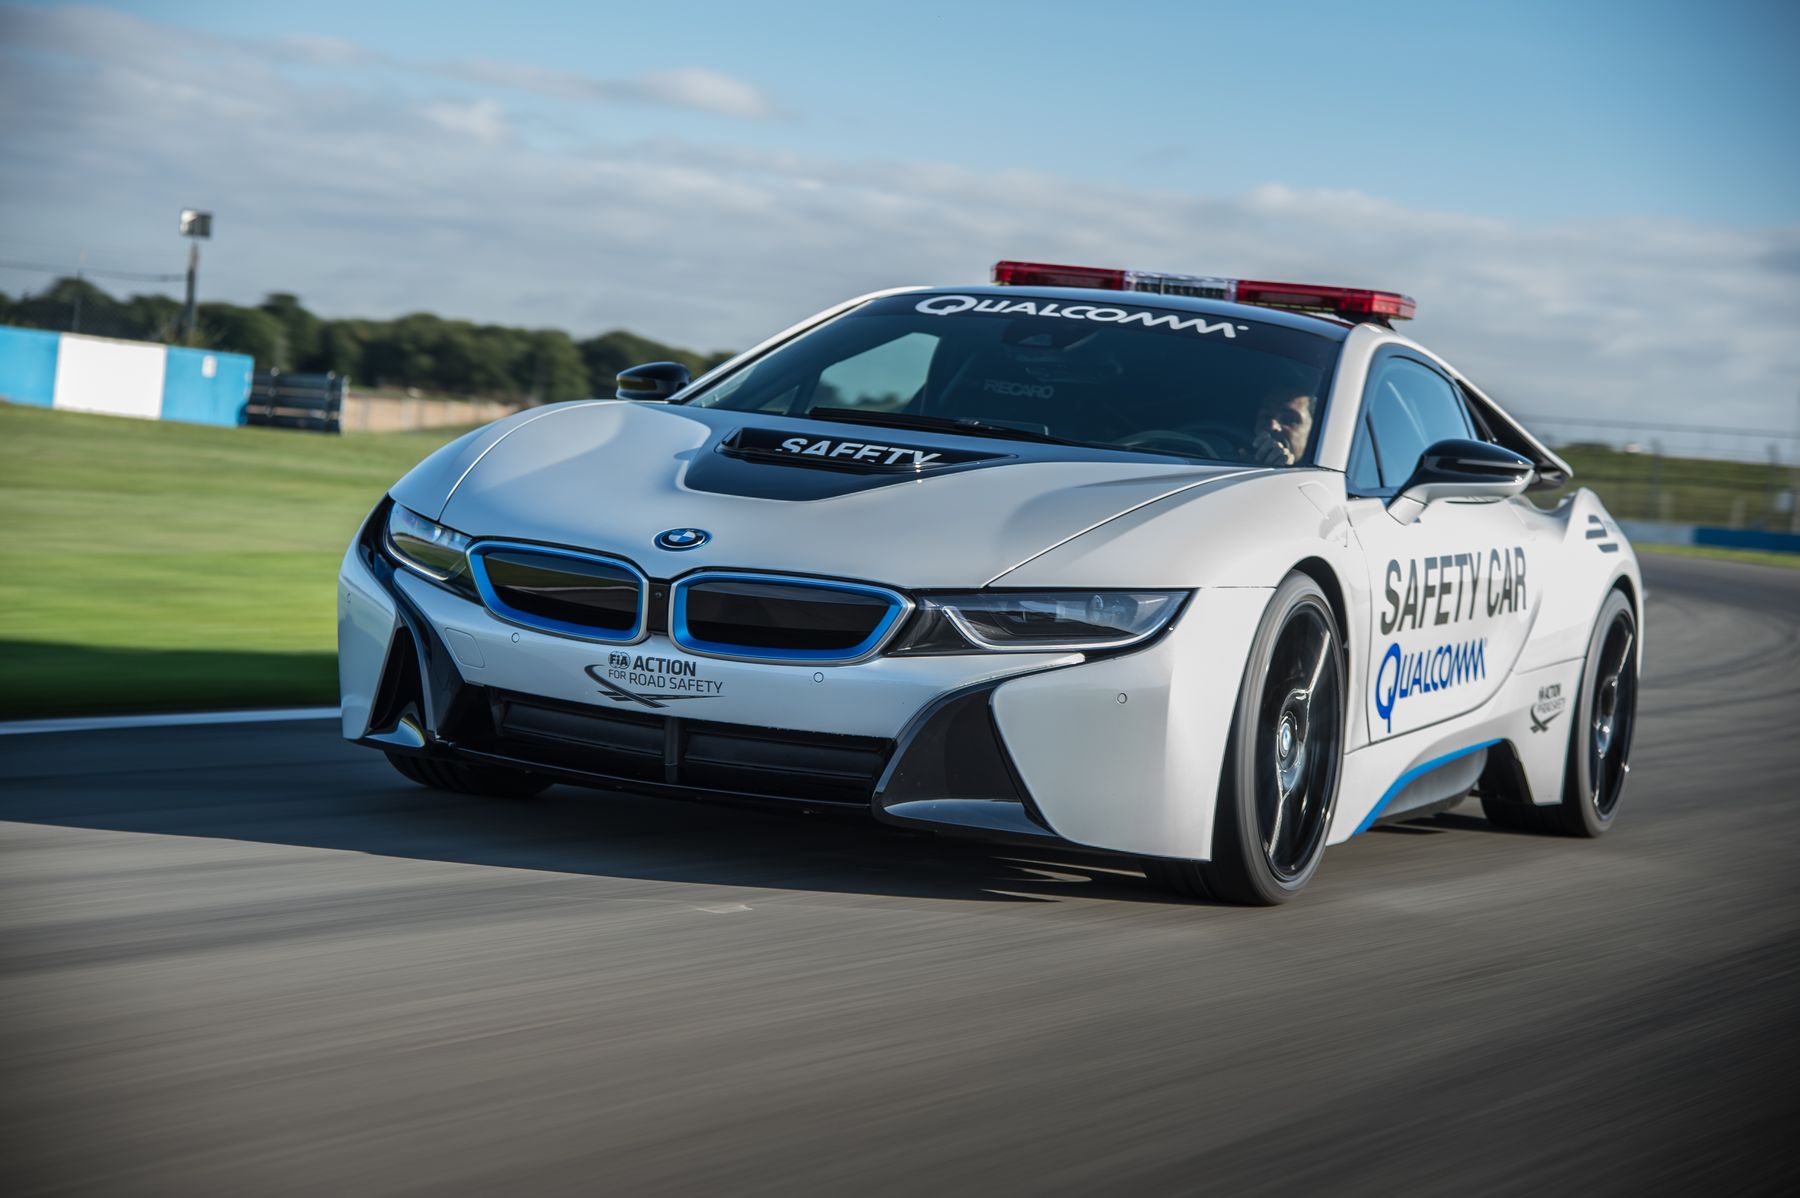 Refreshed Bmw I8 To Get Increased Electric Range